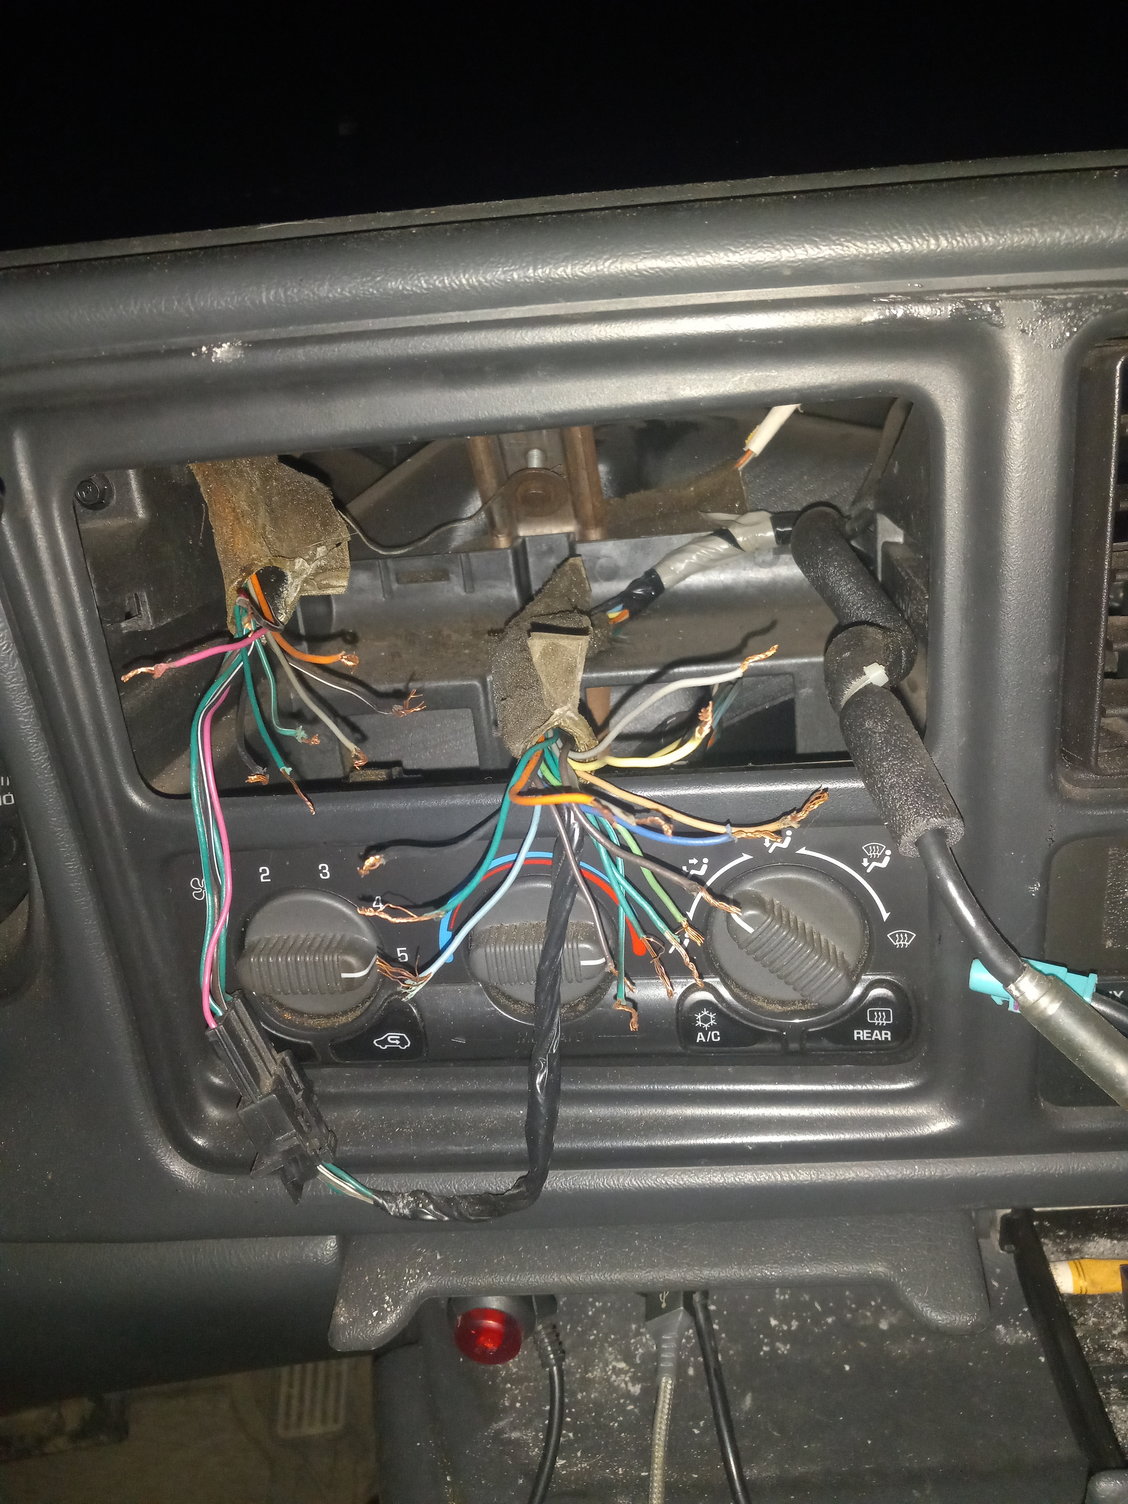 stereo wiring diagram for 2002 silverado 2500 extended cab??? - Chevrolet  Forum - Chevy Enthusiasts Forums  2002 Tahoe Factory Amp Wiring Diagram    ChevroletForum